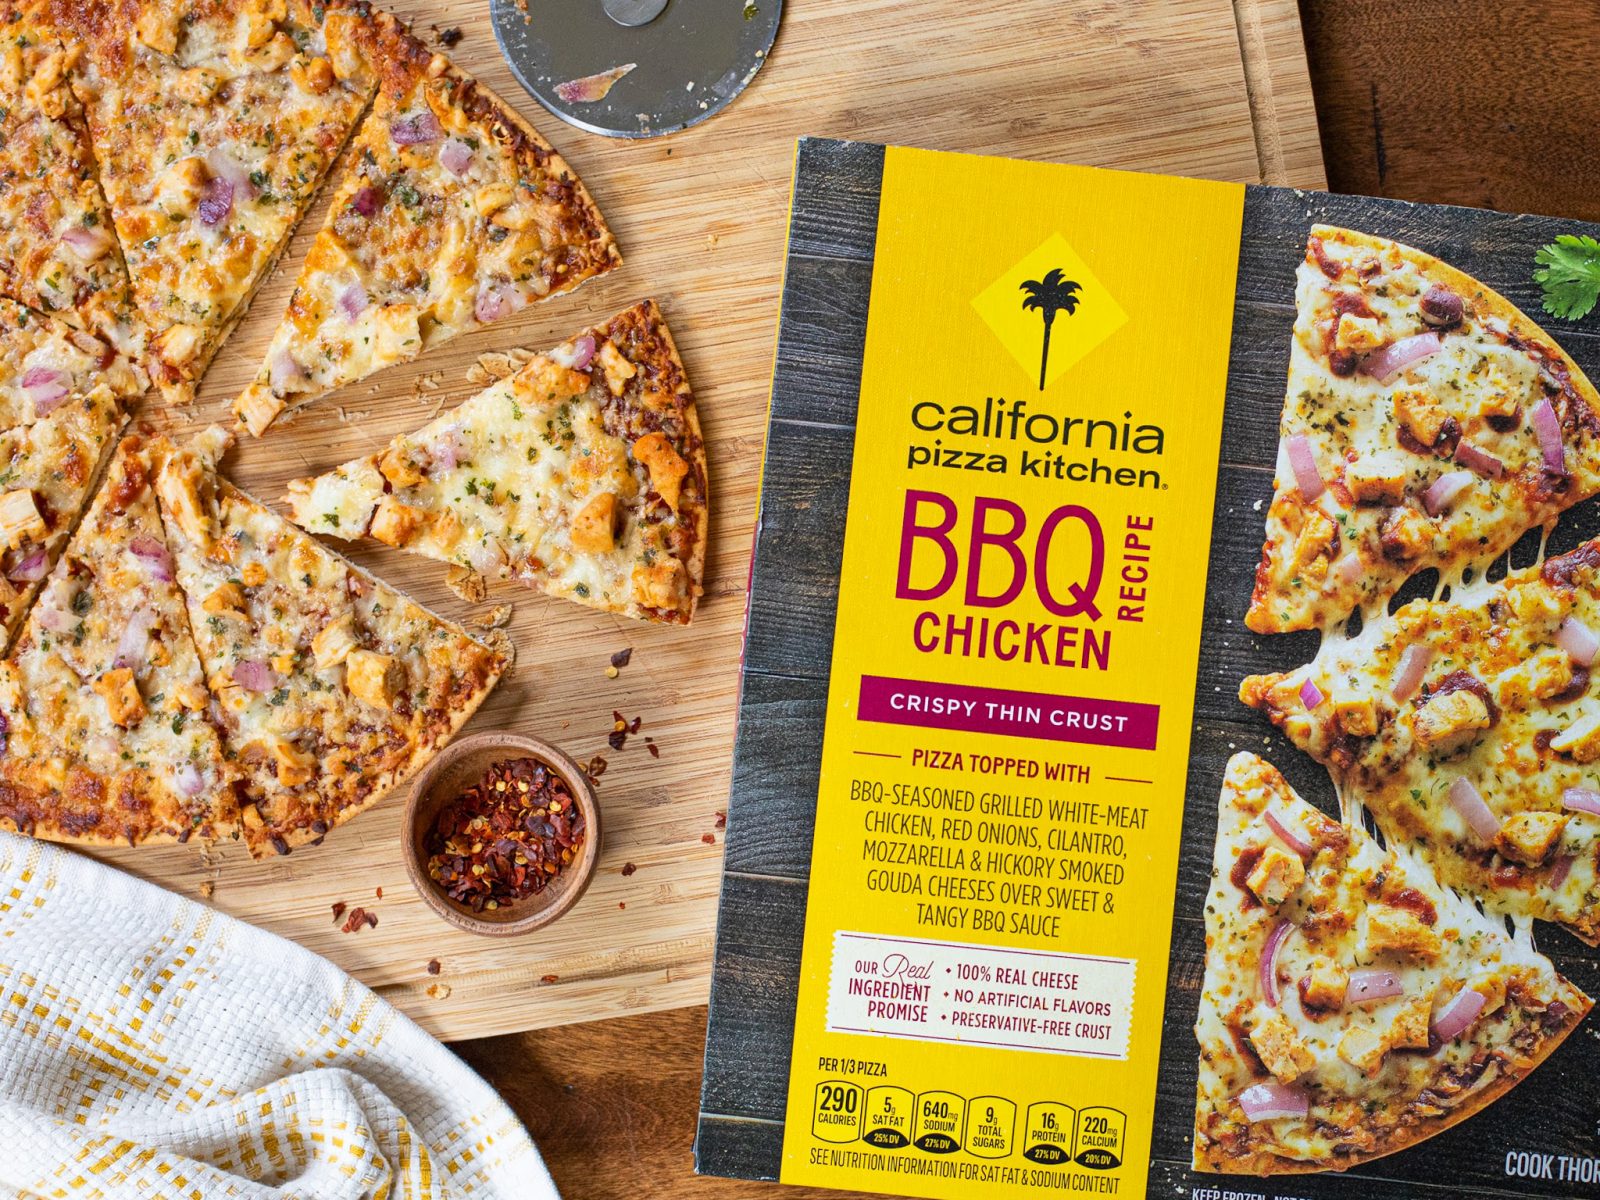 Get California Pizza Kitchen Pizzas For As Low AS $4.99 At Kroger (Regular Price $9.49)